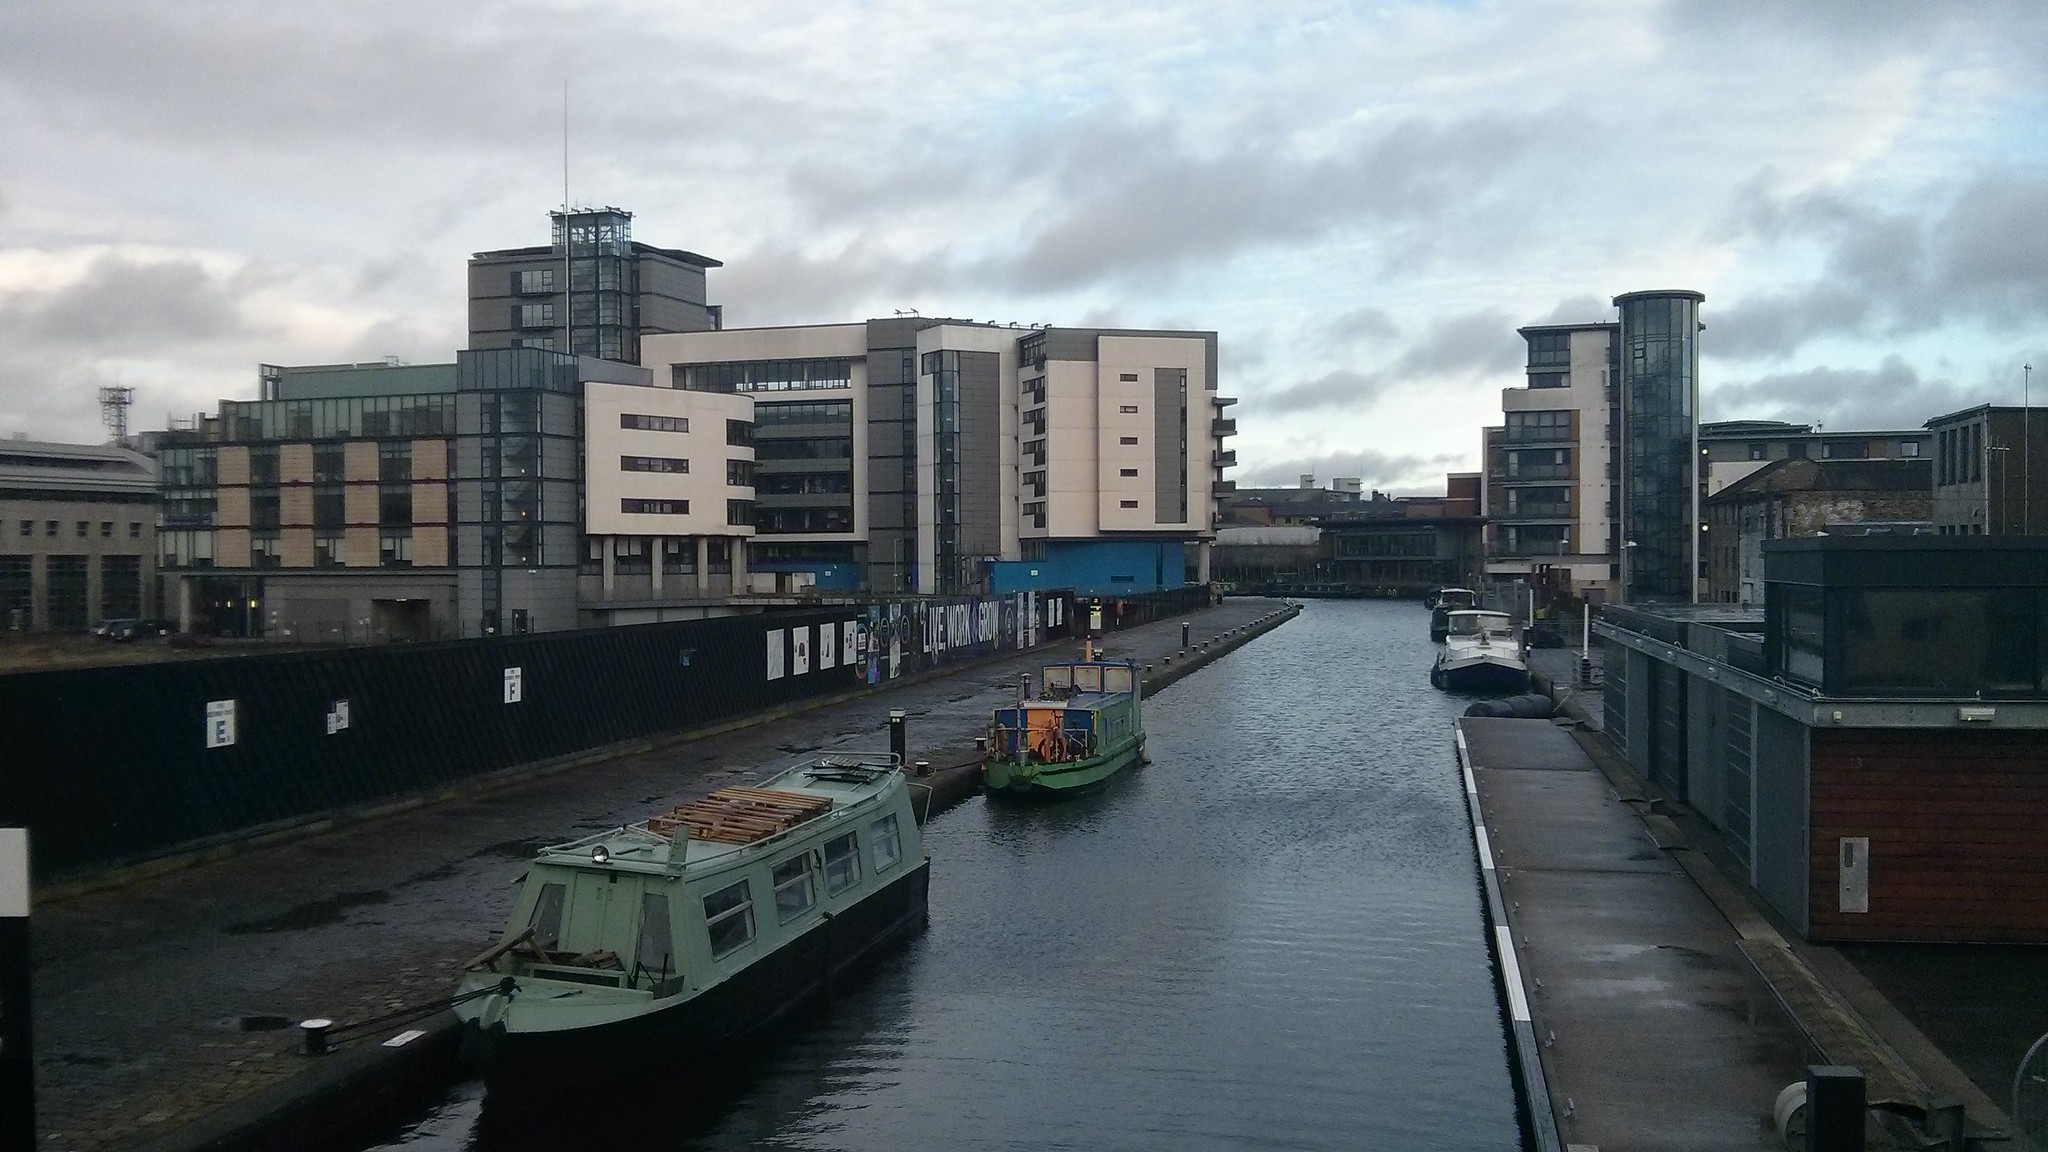 Several modern buildings stand around the end of a canal.